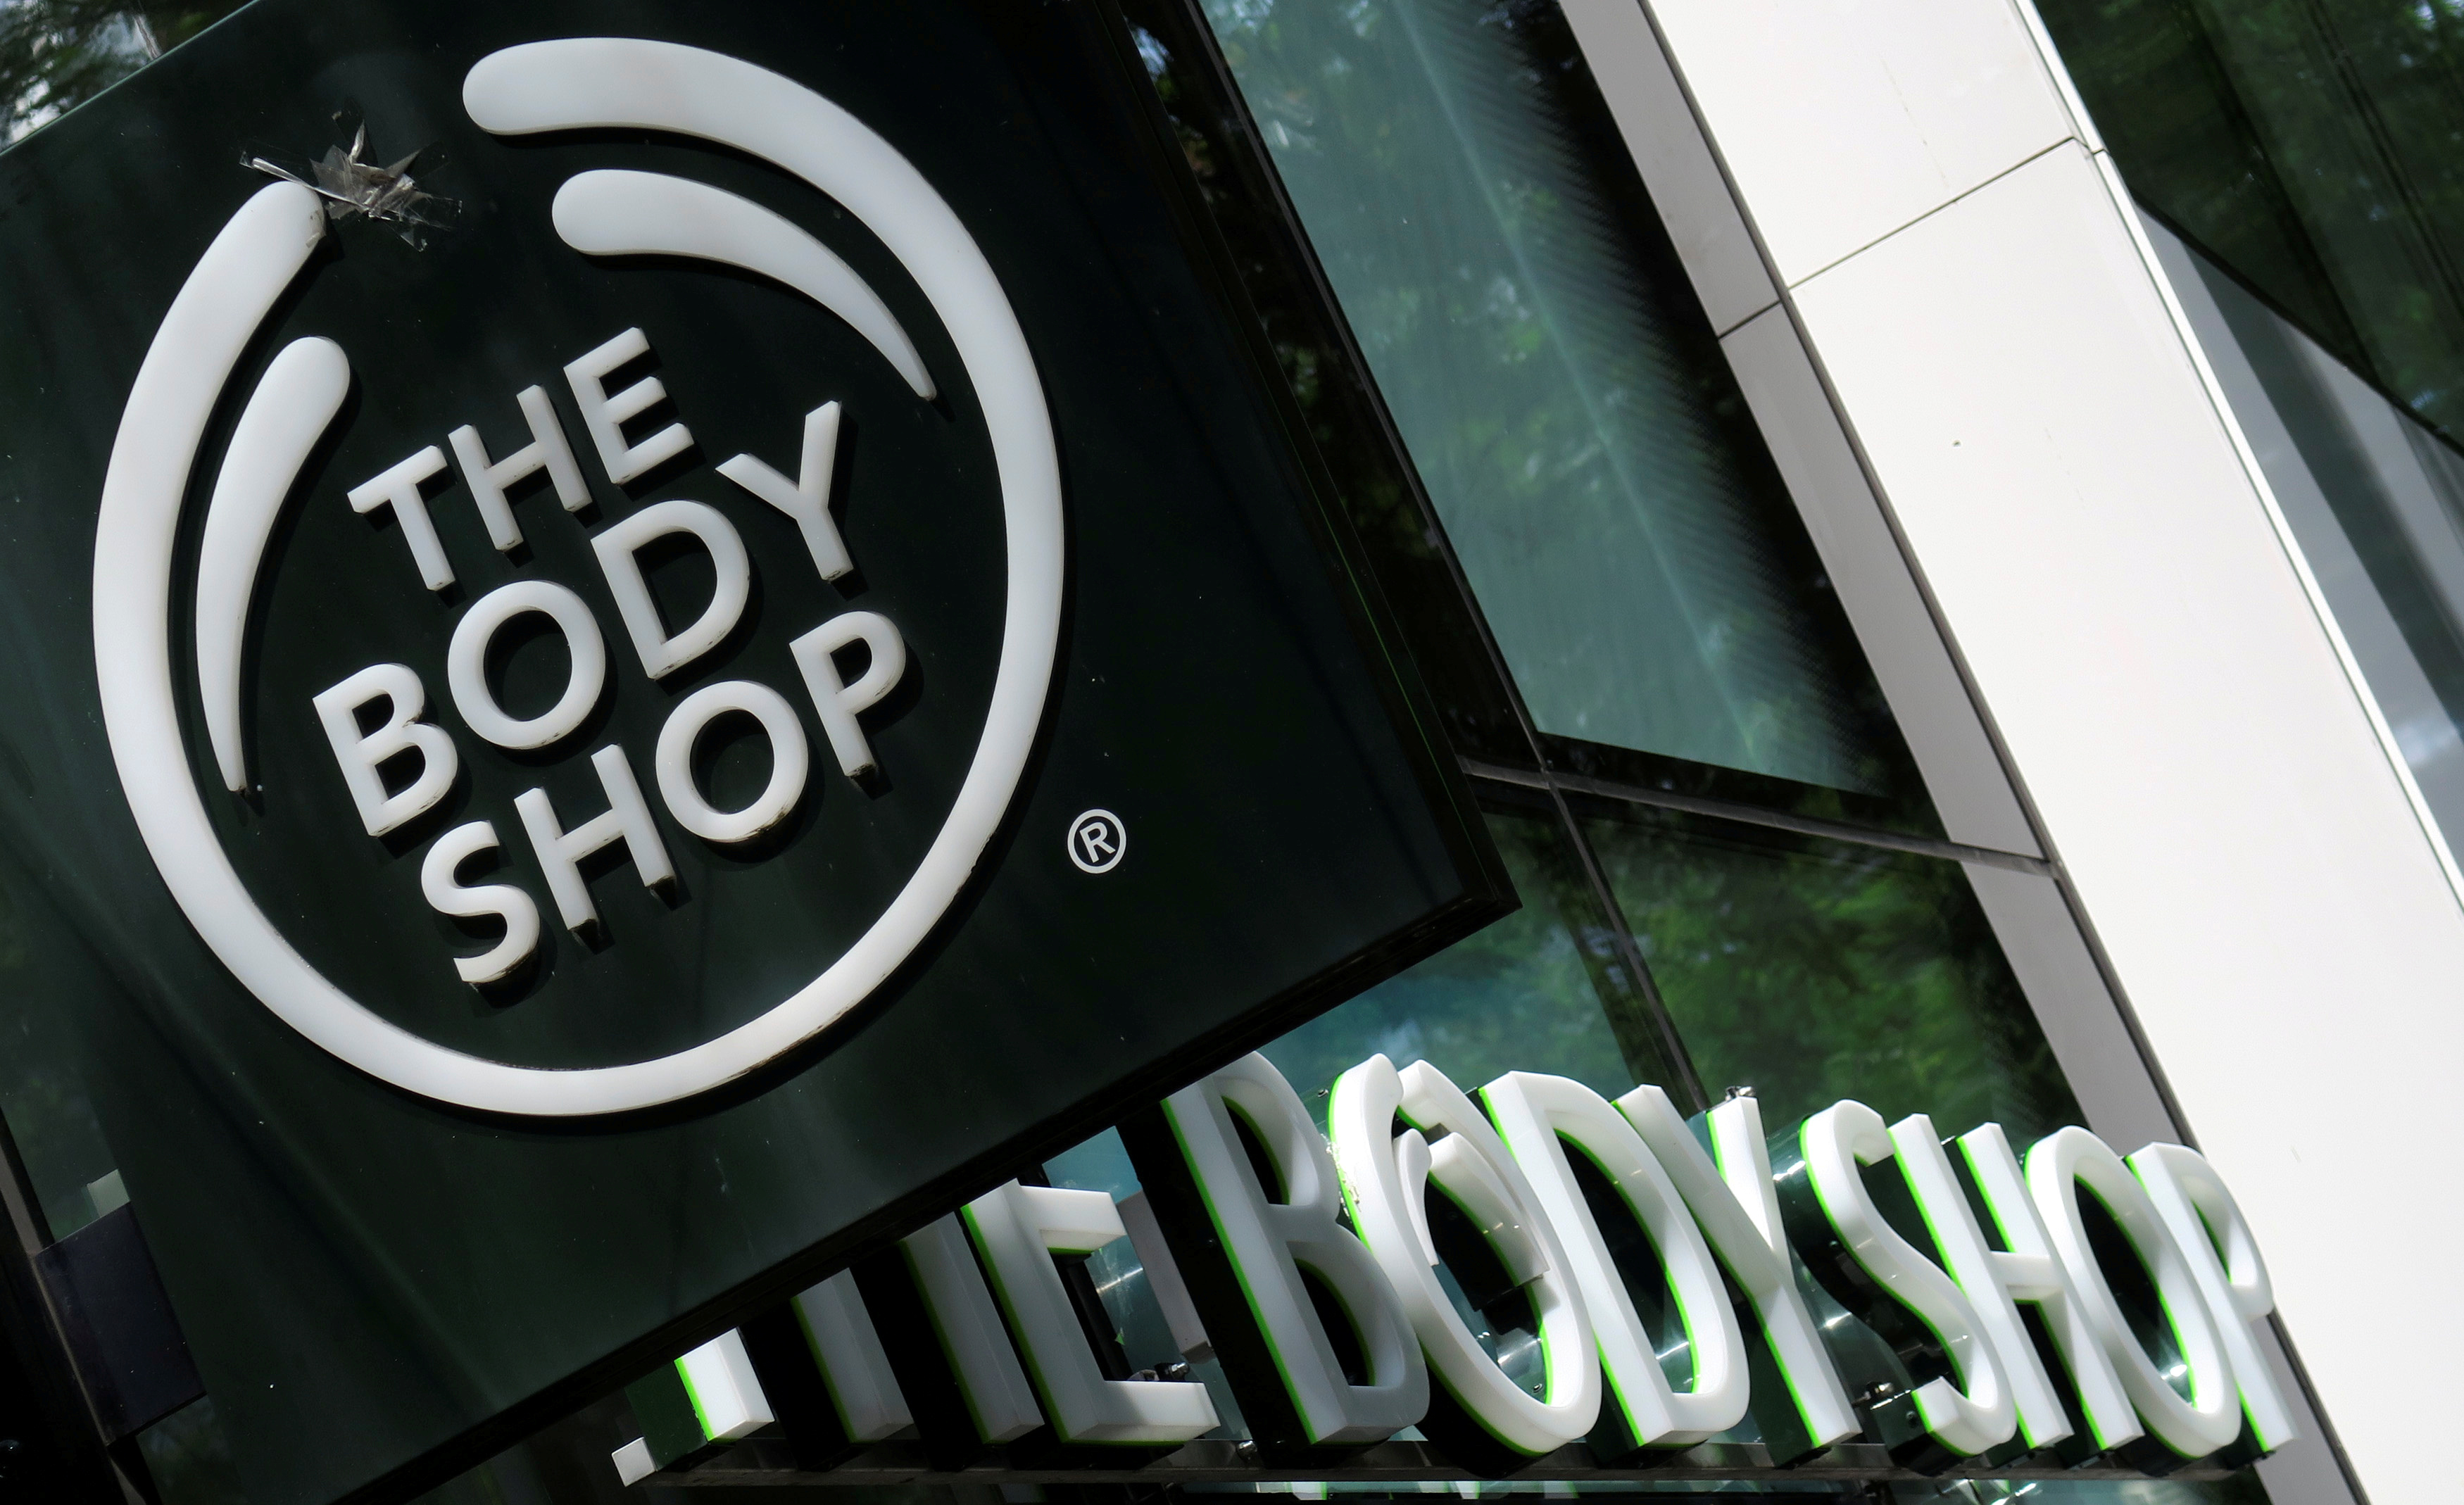 The Body Shop to close 75 stores across the UK